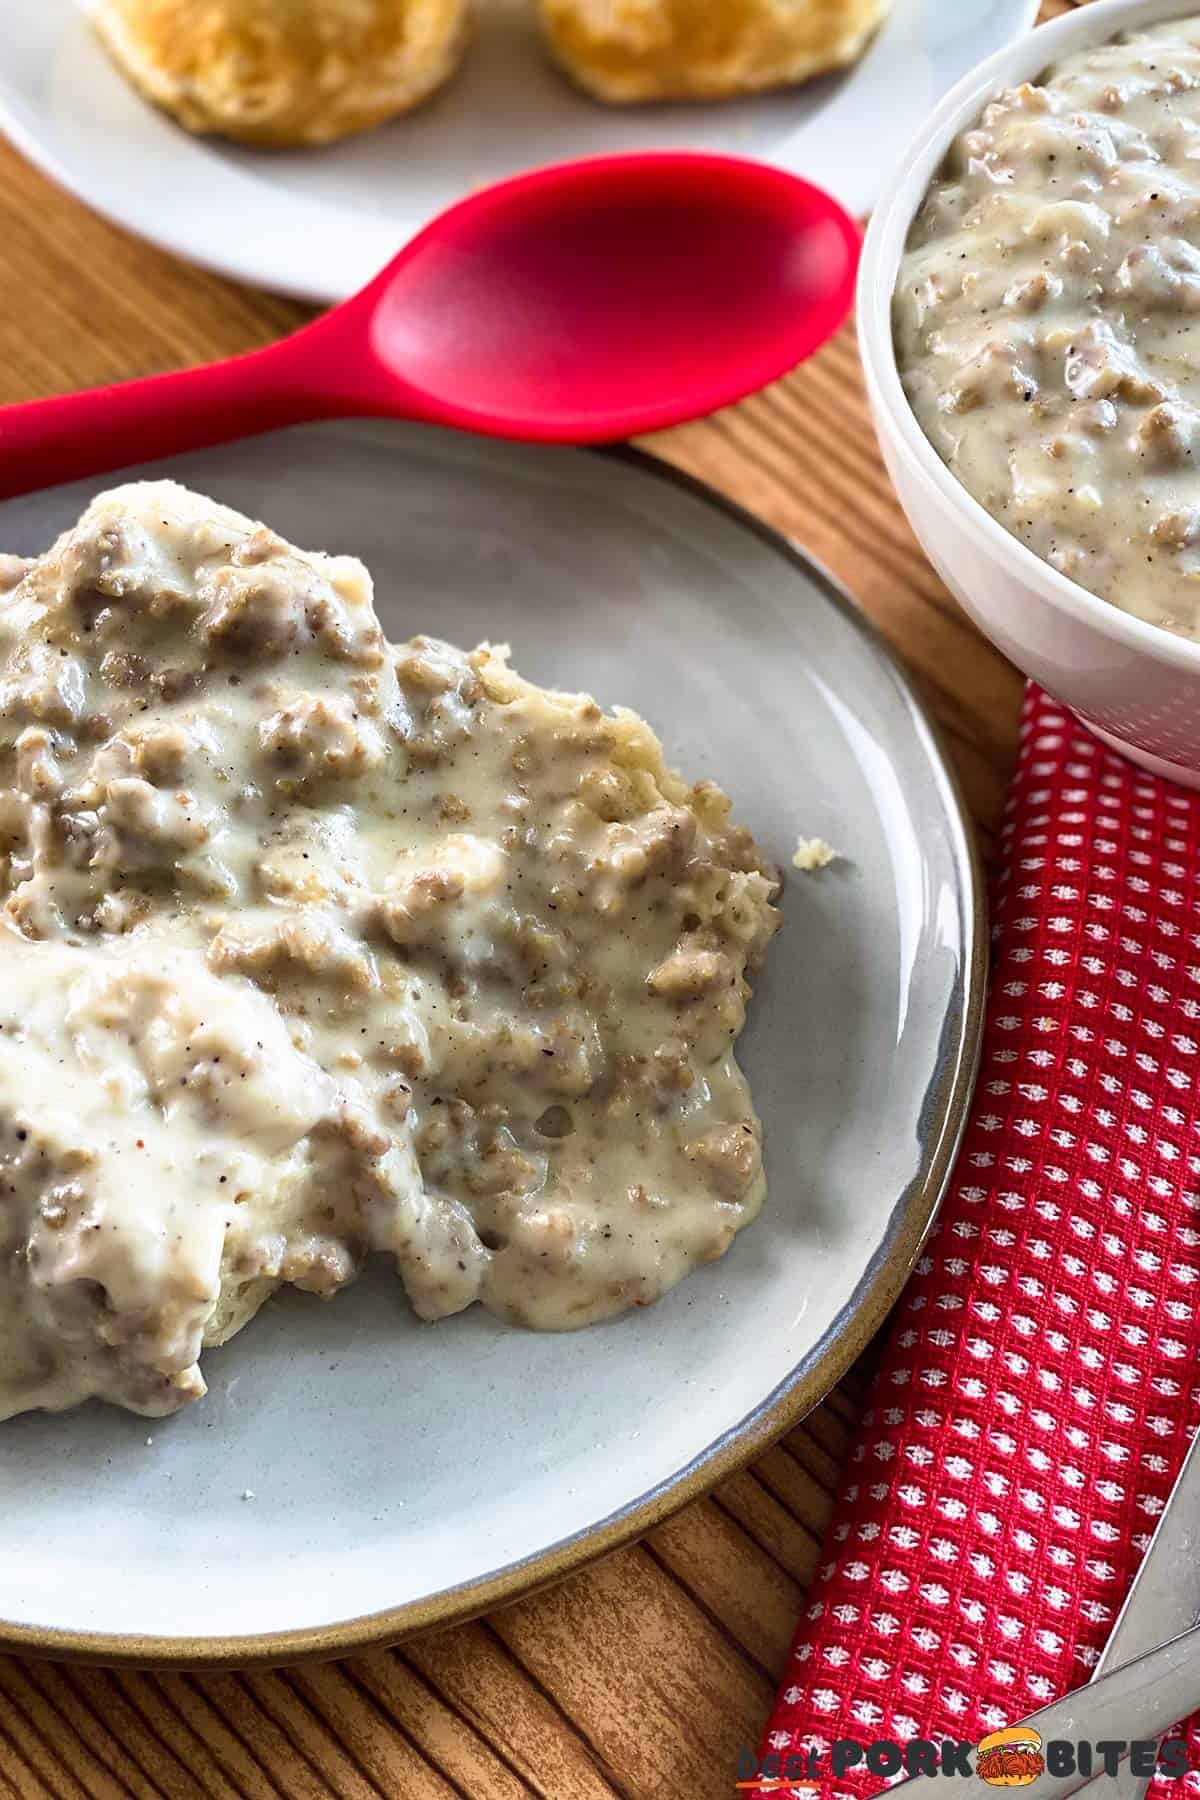 a plate of sausage gravy and biscuits